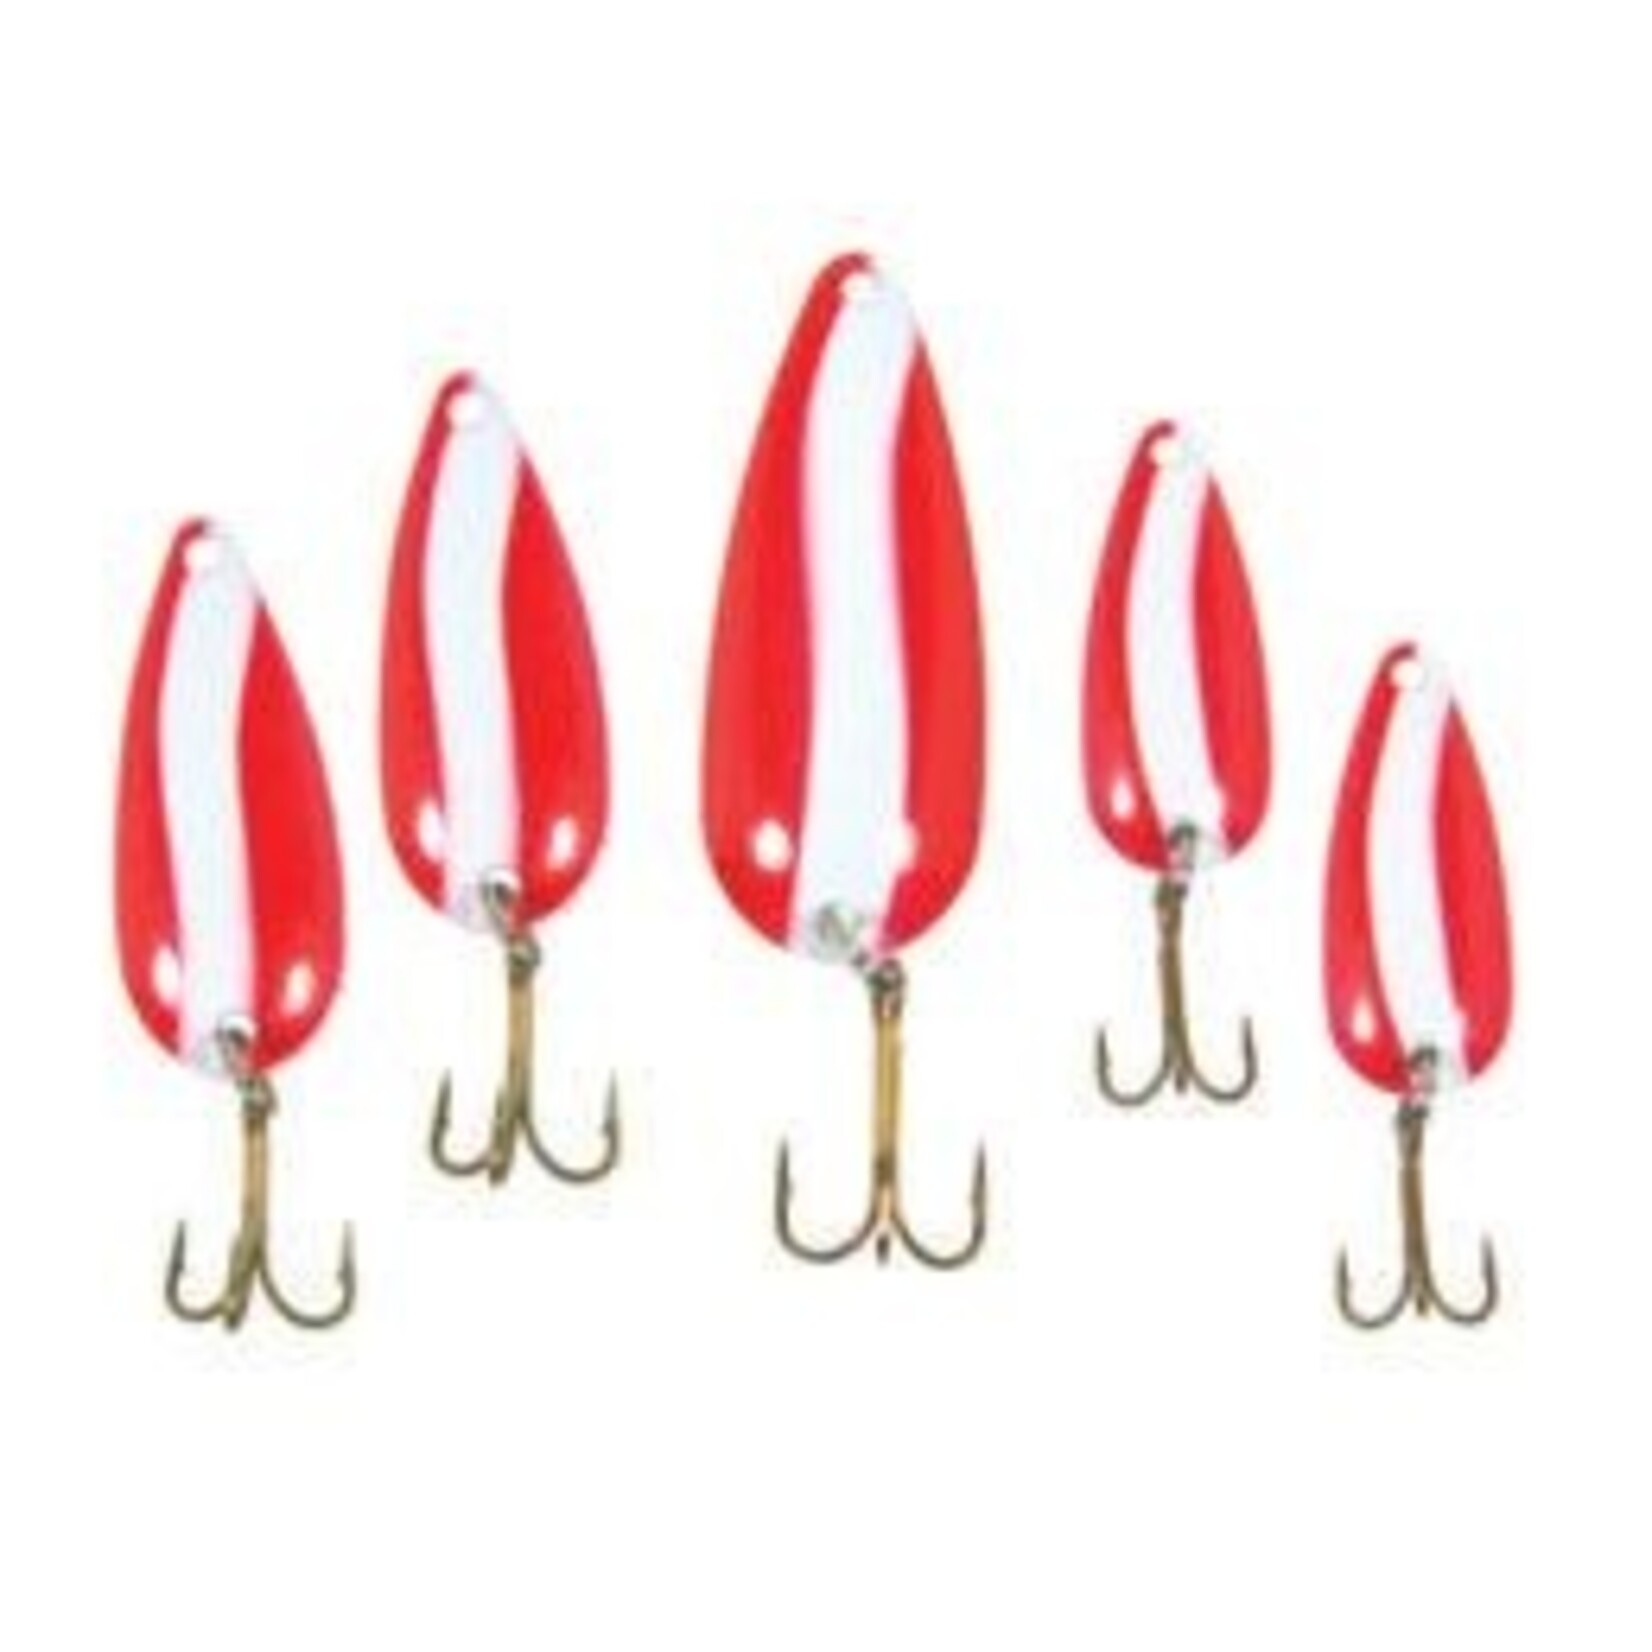 Eagle Claw Red/White Spoon Assortment - Backcountry Supplies